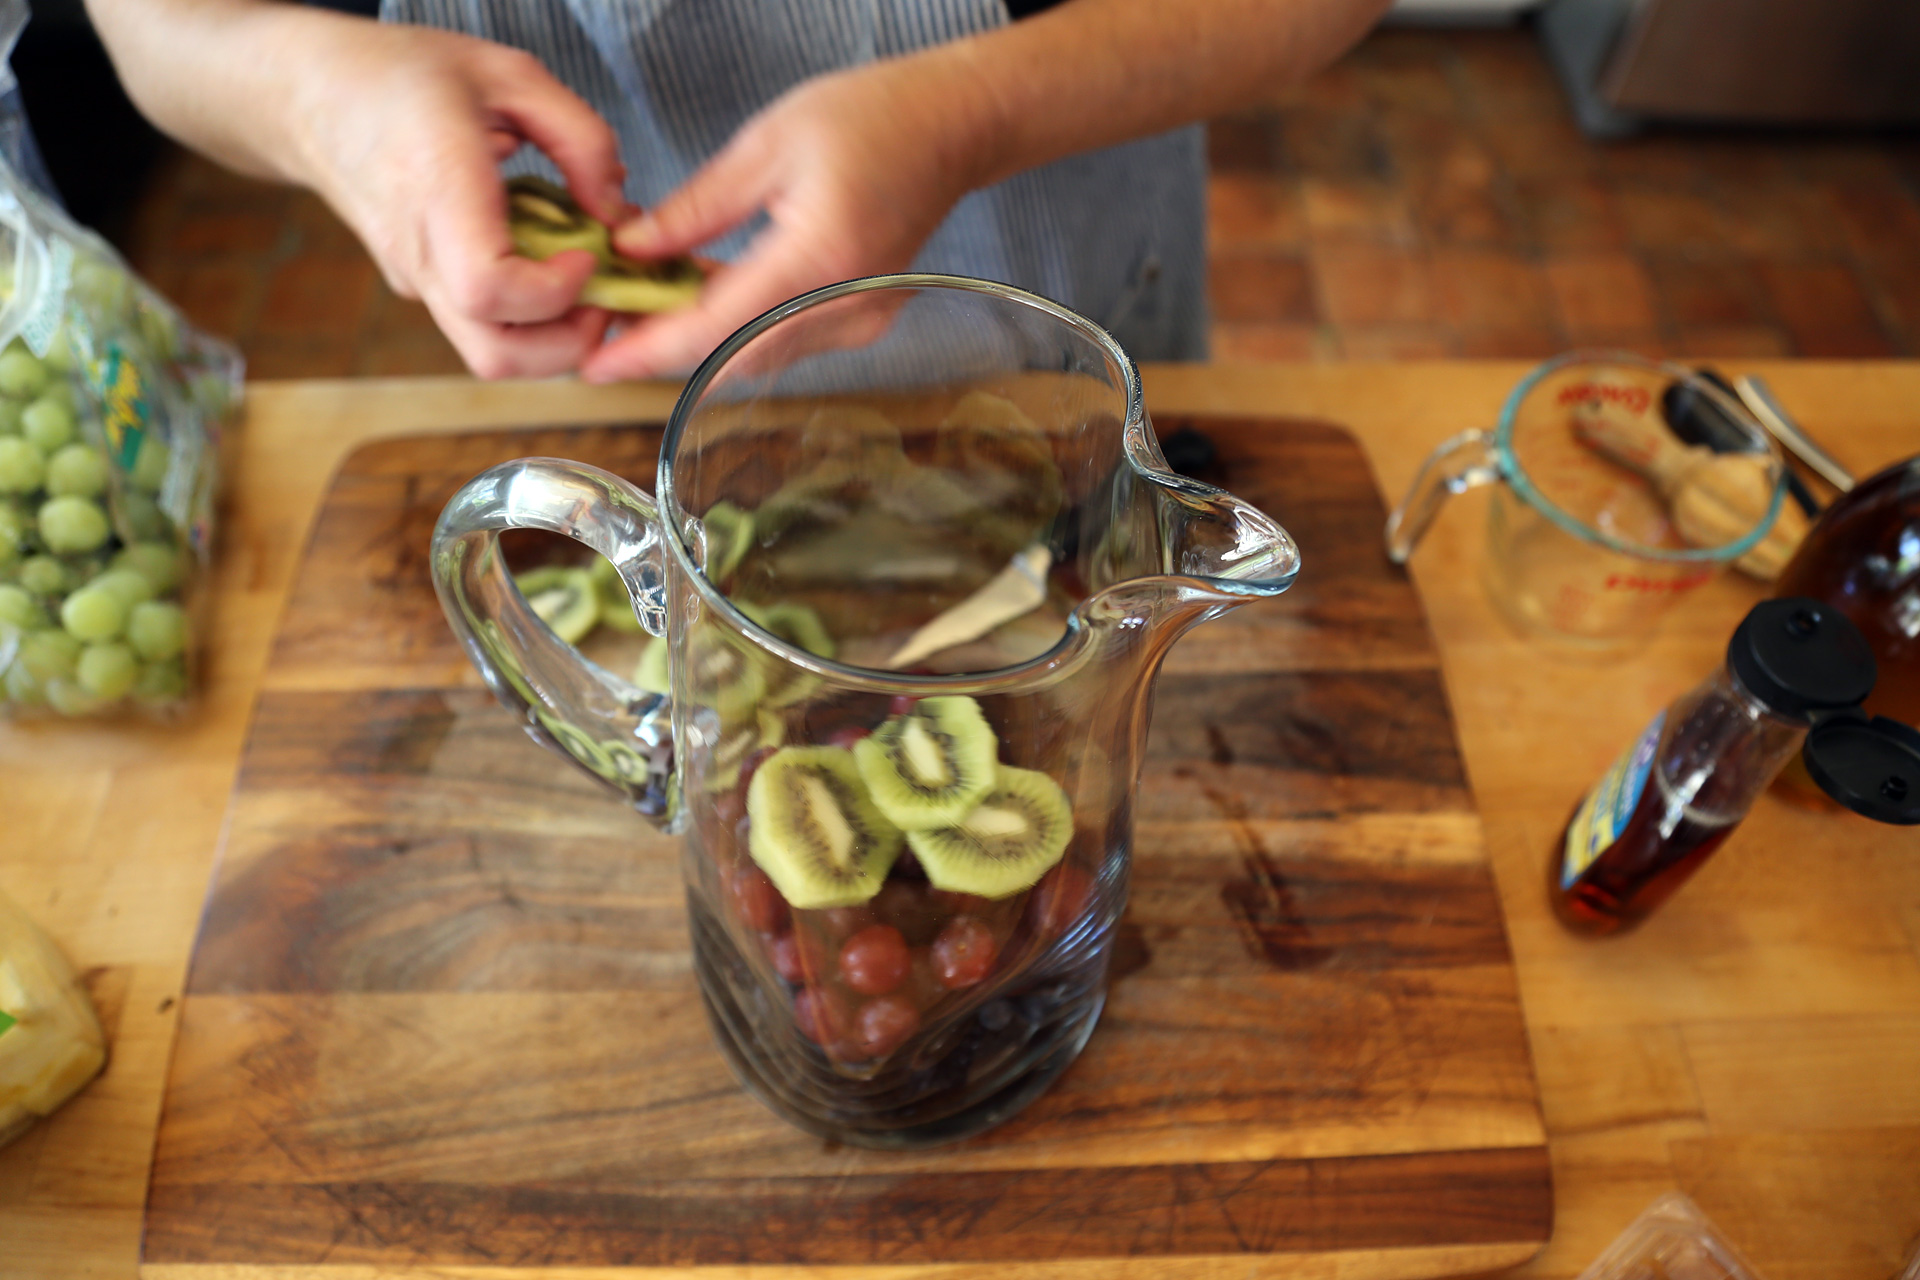 In a large glass pitcher, add layers of fruit in the order of the ingredient list.